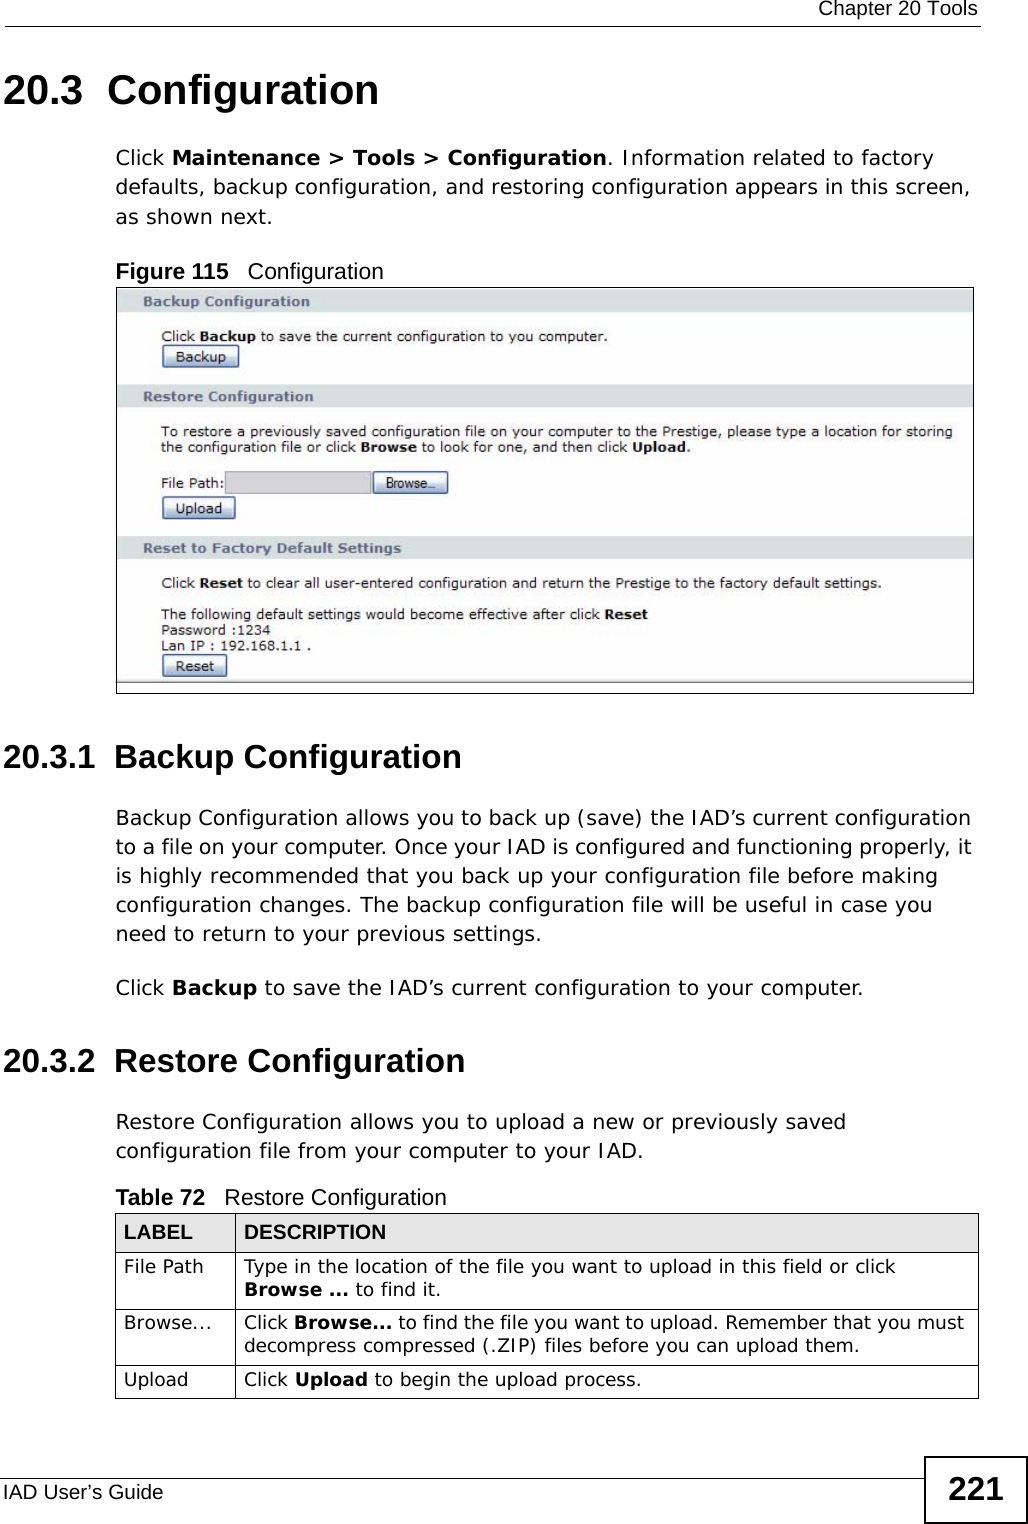  Chapter 20 ToolsIAD User’s Guide 22120.3  Configuration  Click Maintenance &gt; Tools &gt; Configuration. Information related to factory defaults, backup configuration, and restoring configuration appears in this screen, as shown next.Figure 115   Configuration20.3.1  Backup Configuration Backup Configuration allows you to back up (save) the IAD’s current configuration to a file on your computer. Once your IAD is configured and functioning properly, it is highly recommended that you back up your configuration file before making configuration changes. The backup configuration file will be useful in case you need to return to your previous settings. Click Backup to save the IAD’s current configuration to your computer.20.3.2  Restore Configuration Restore Configuration allows you to upload a new or previously saved configuration file from your computer to your IAD.Table 72   Restore ConfigurationLABEL DESCRIPTIONFile Path  Type in the location of the file you want to upload in this field or click Browse ... to find it.Browse...  Click Browse... to find the file you want to upload. Remember that you must decompress compressed (.ZIP) files before you can upload them. Upload  Click Upload to begin the upload process.